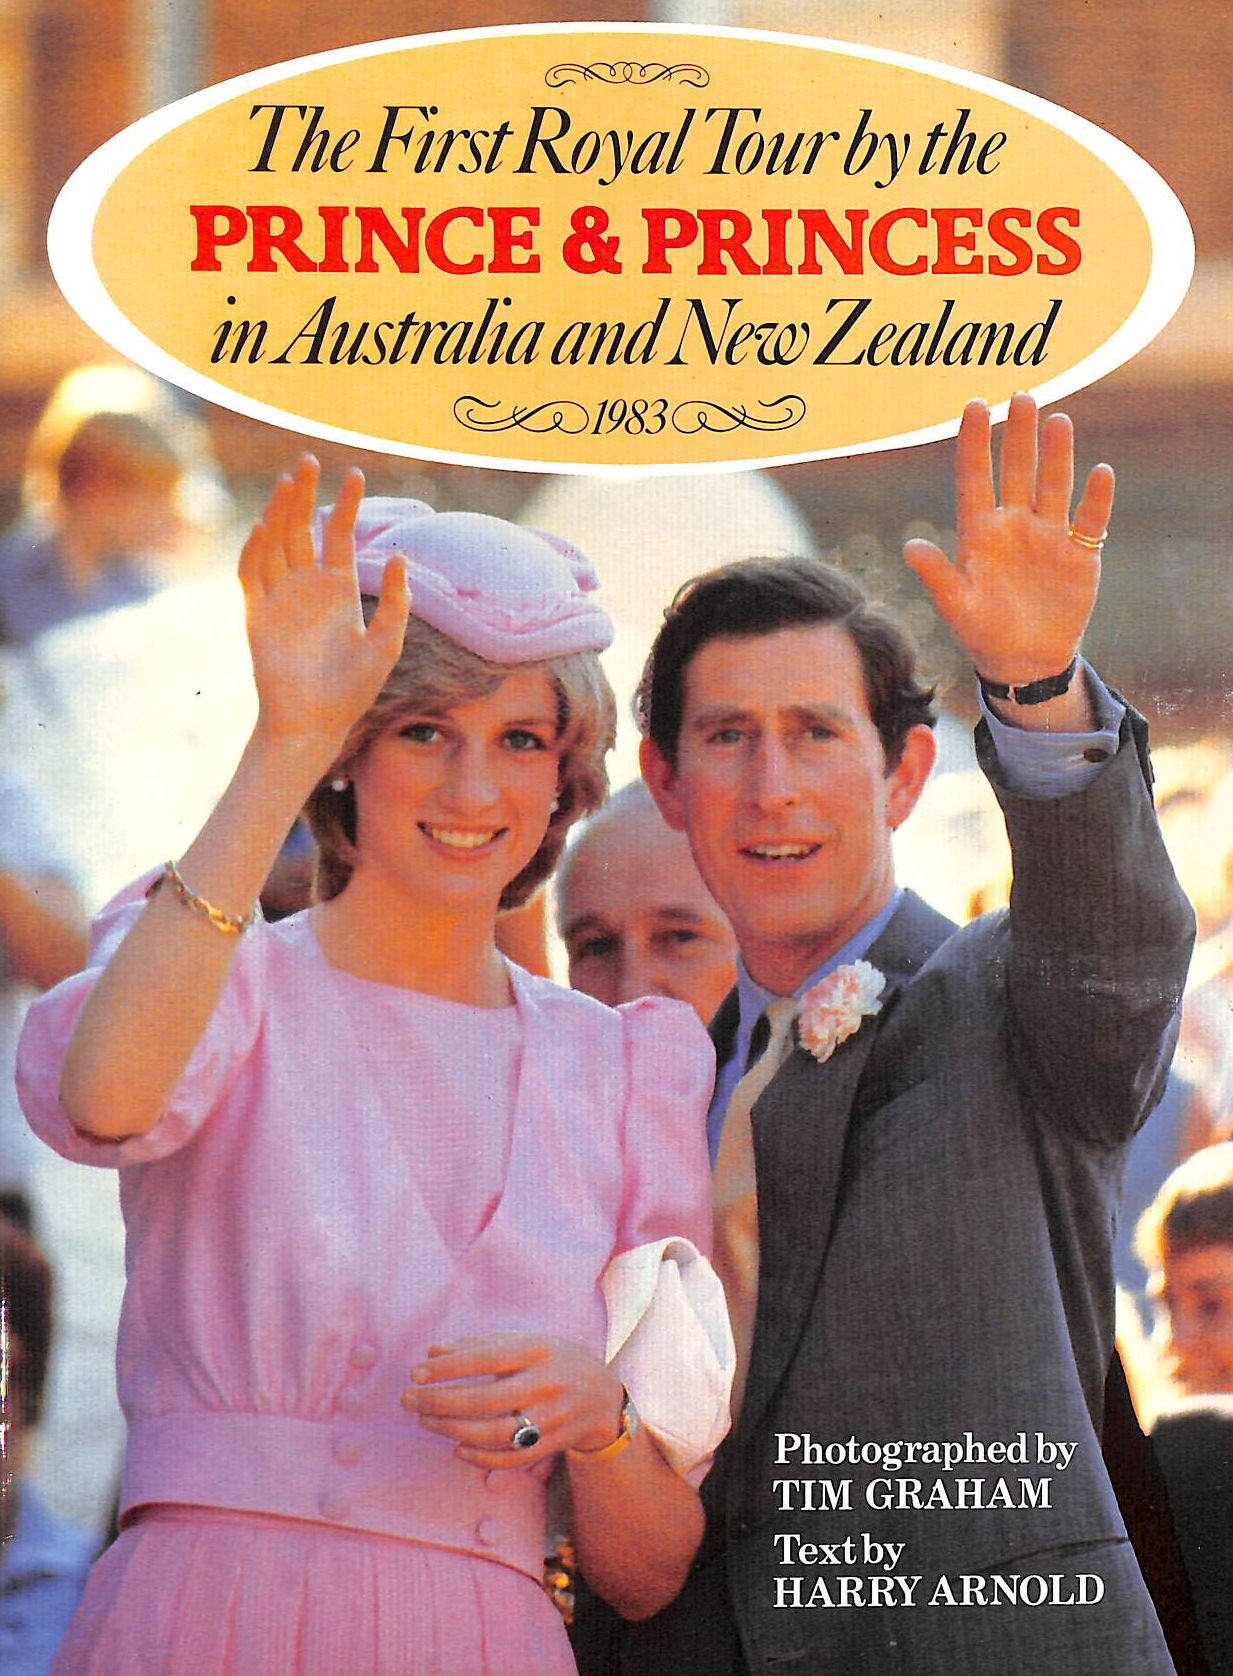 ARNOLD, HARRY - First Royal Tour by the Prince and Princess of Wales in Australia and New Zealand